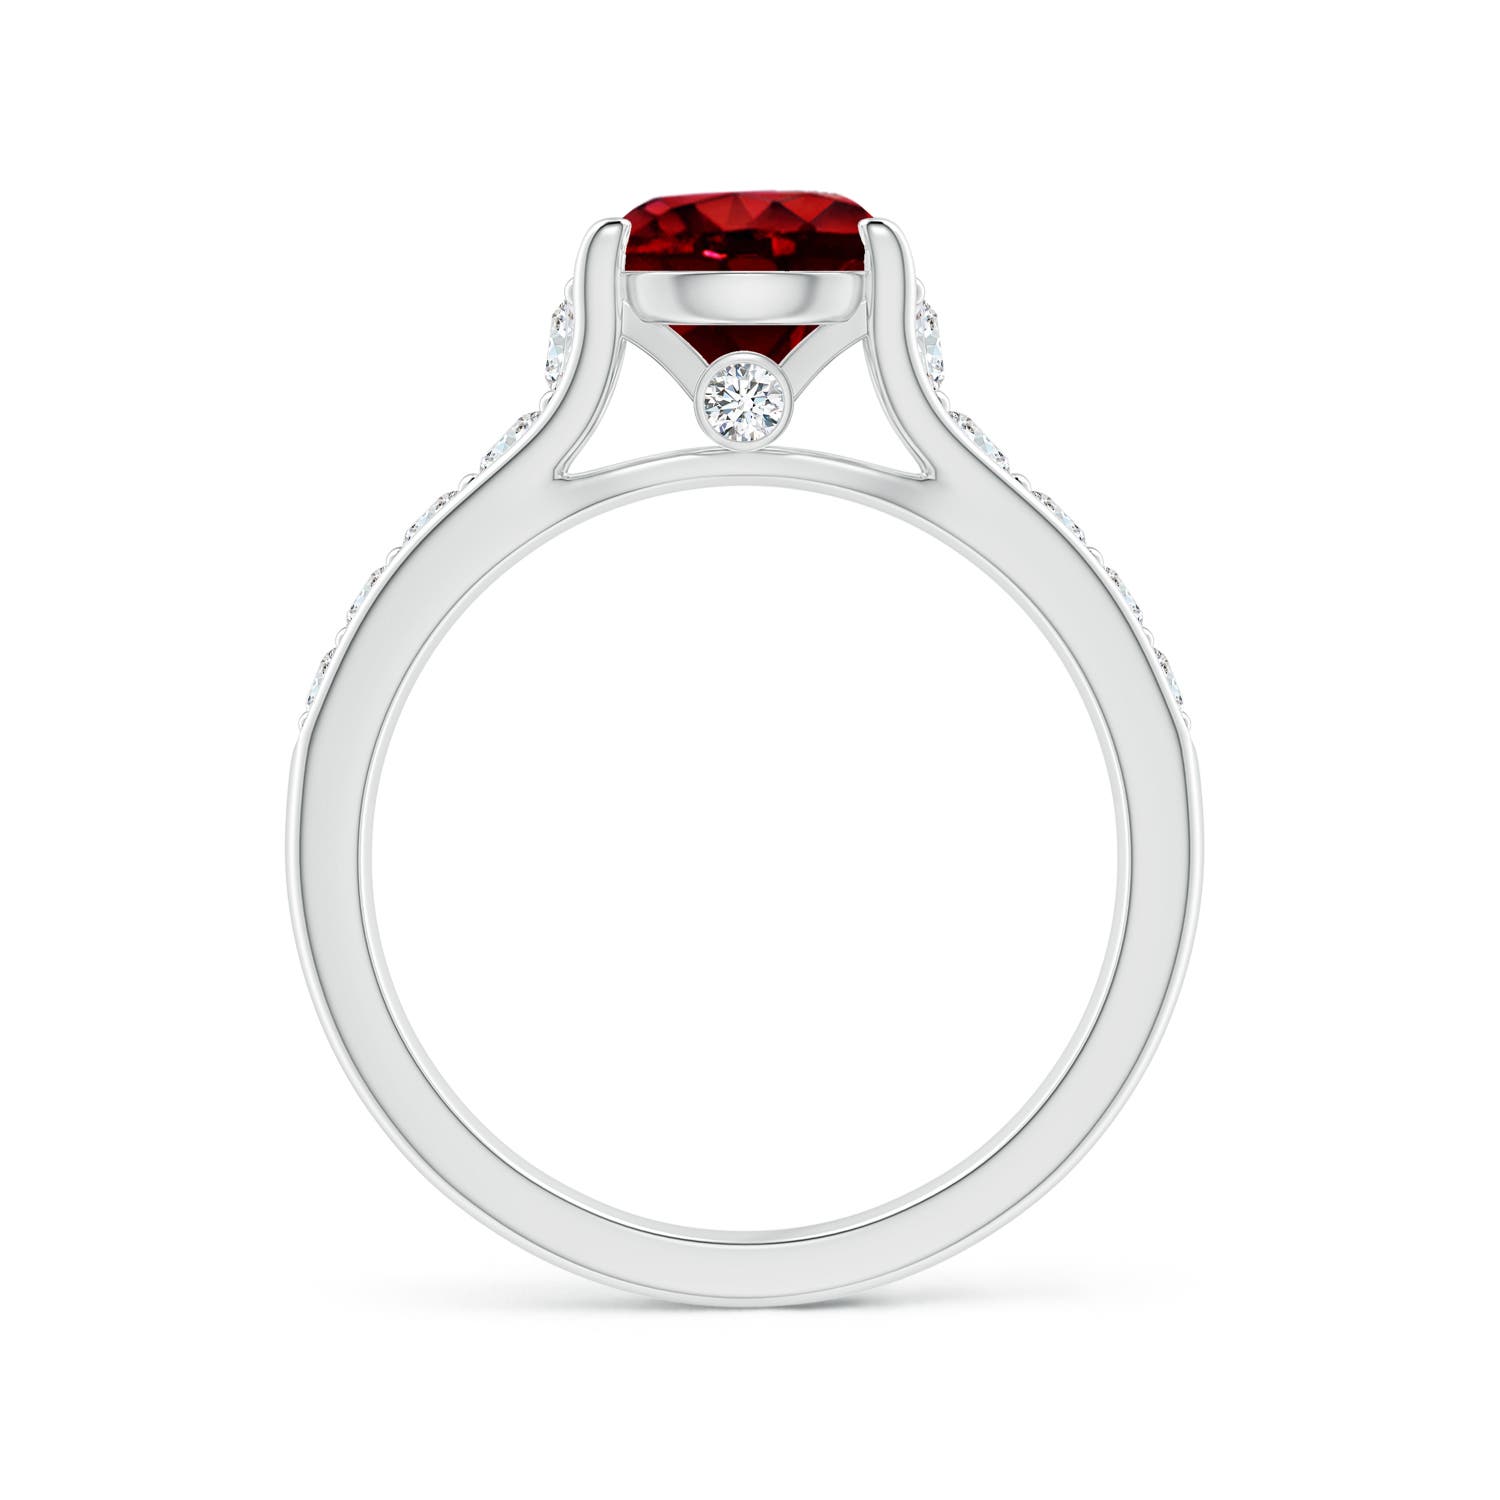 AAAA - Ruby / 1.94 CT / 14 KT White Gold